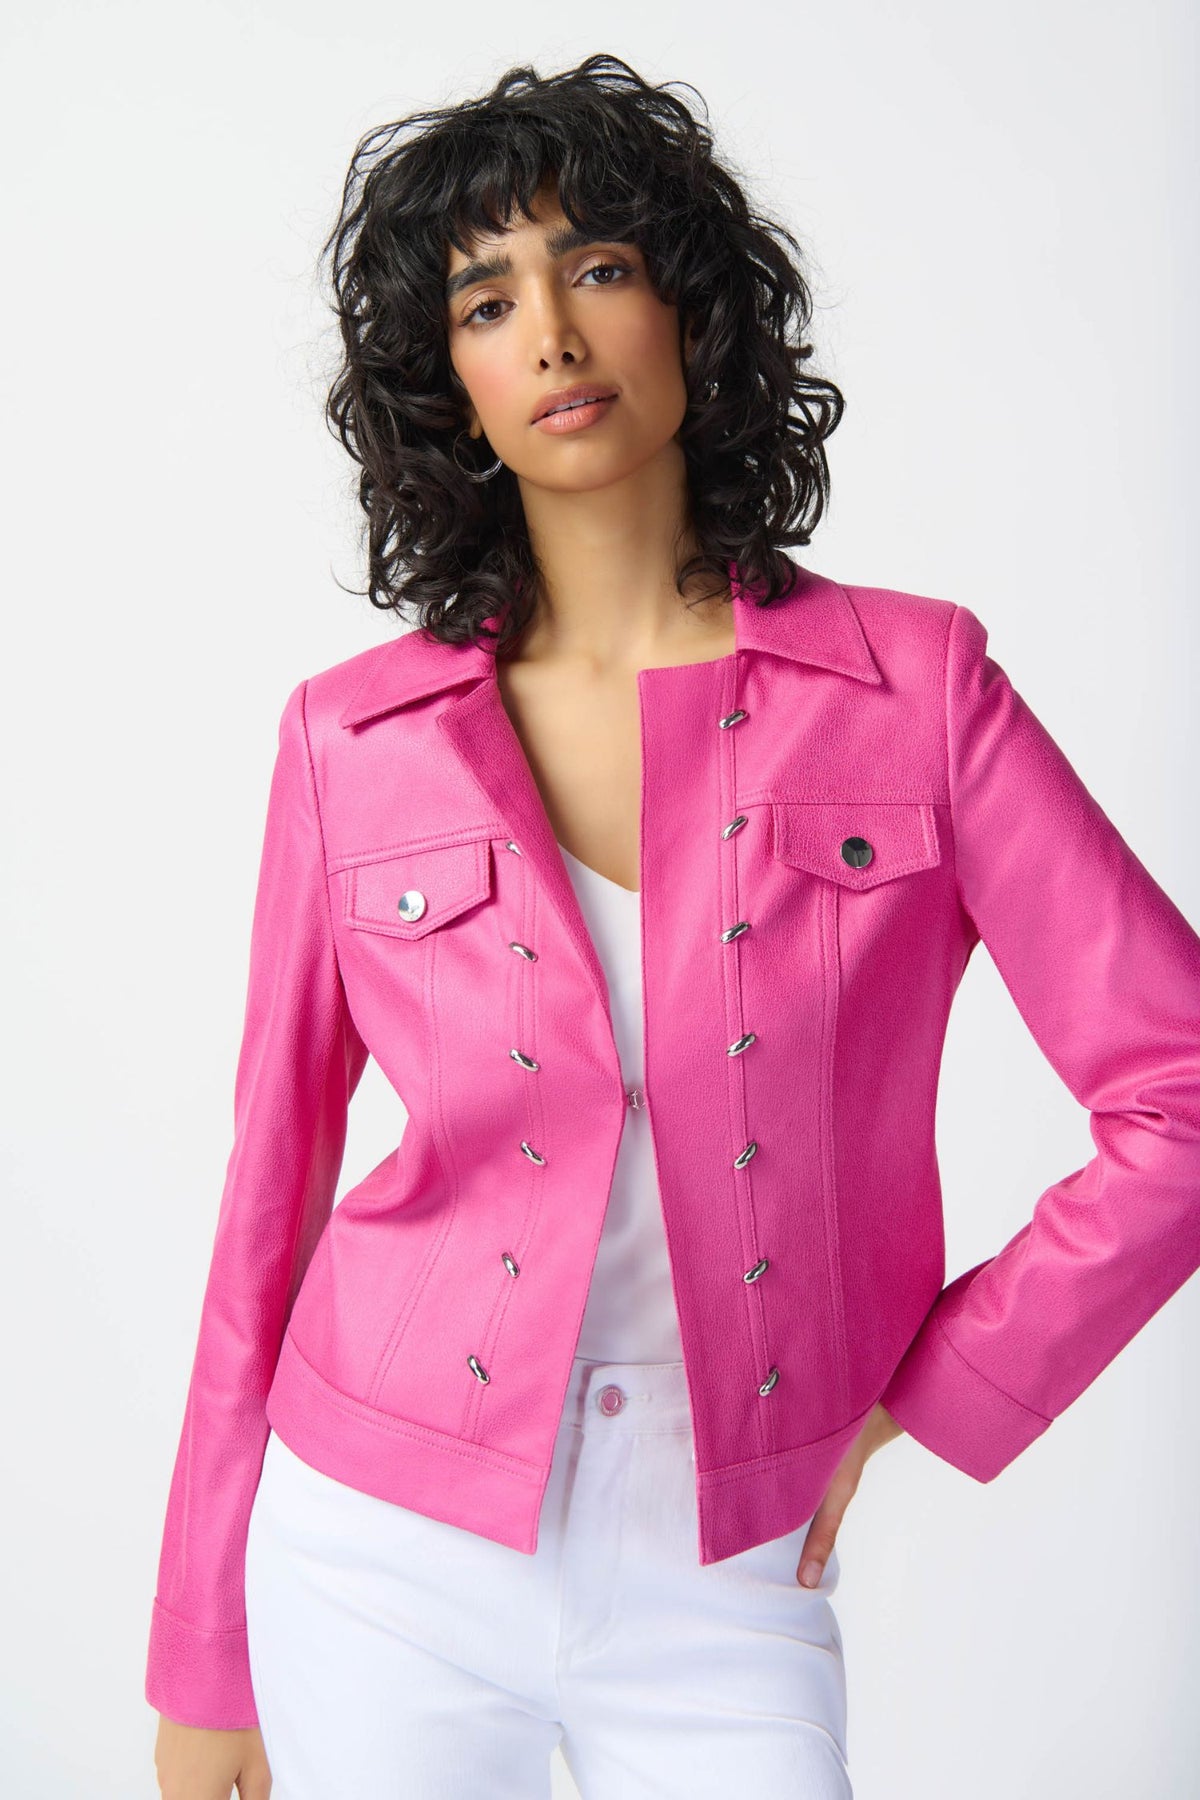 Joseph Ribkoff Foiled Suede Jacket With Metal Trims - Style 241911, front, pink